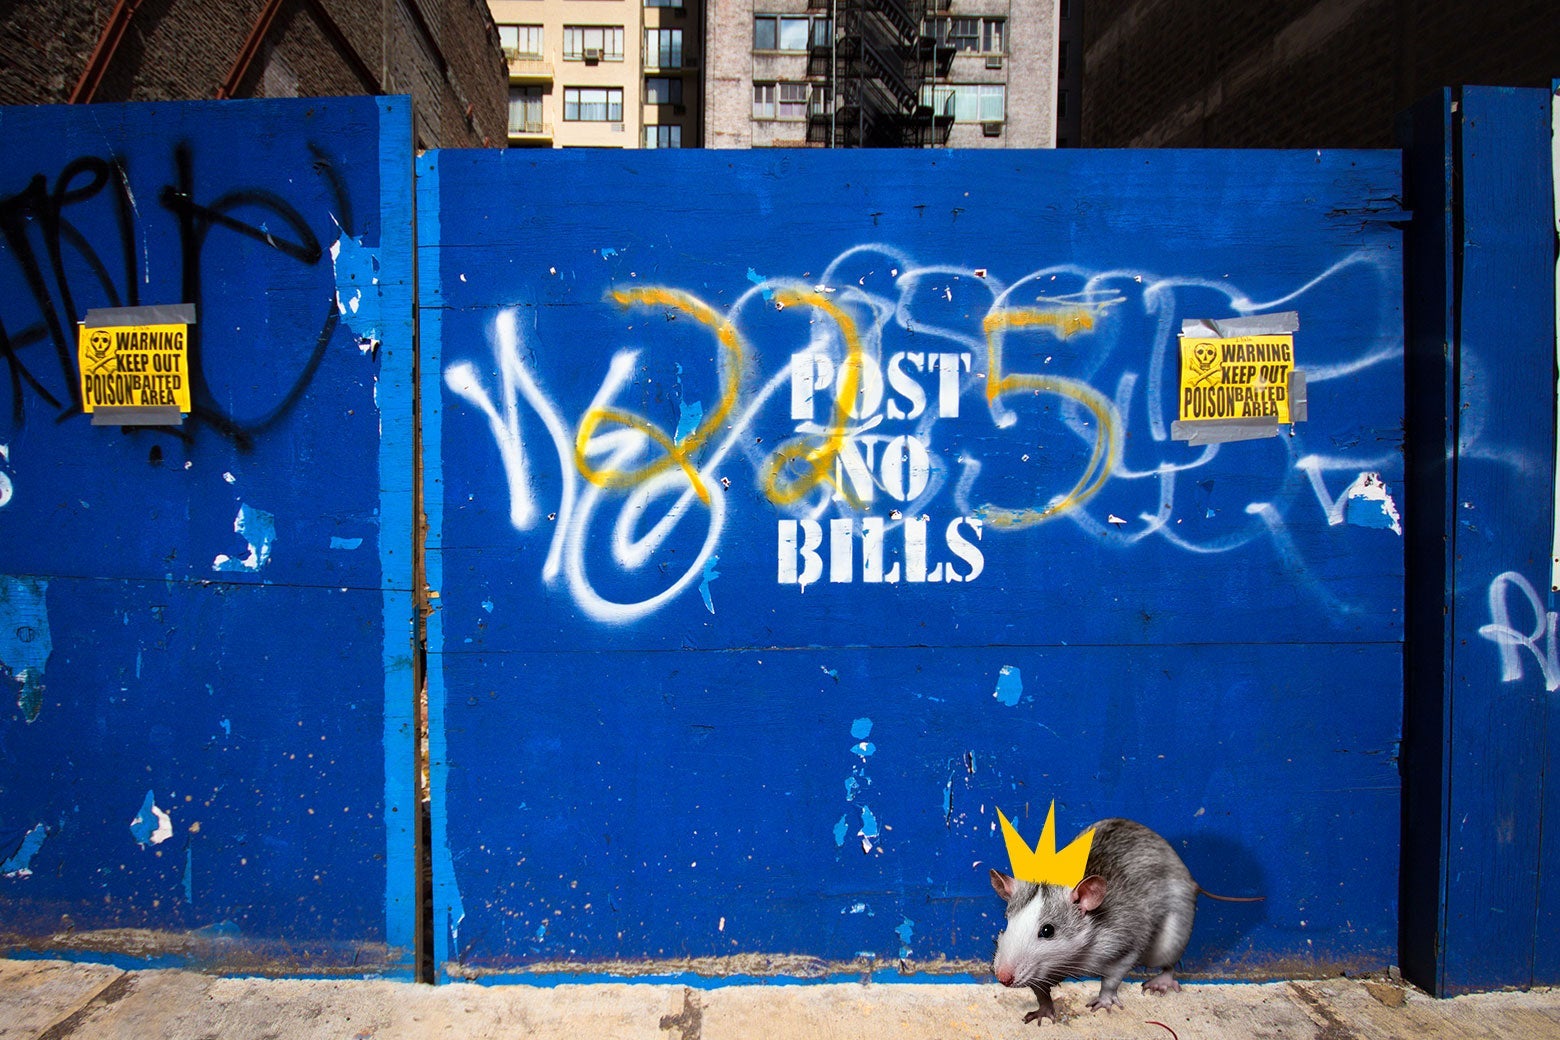 A rat wearing a crown crawls on a city street in front of a wall marked "Post No Bills"